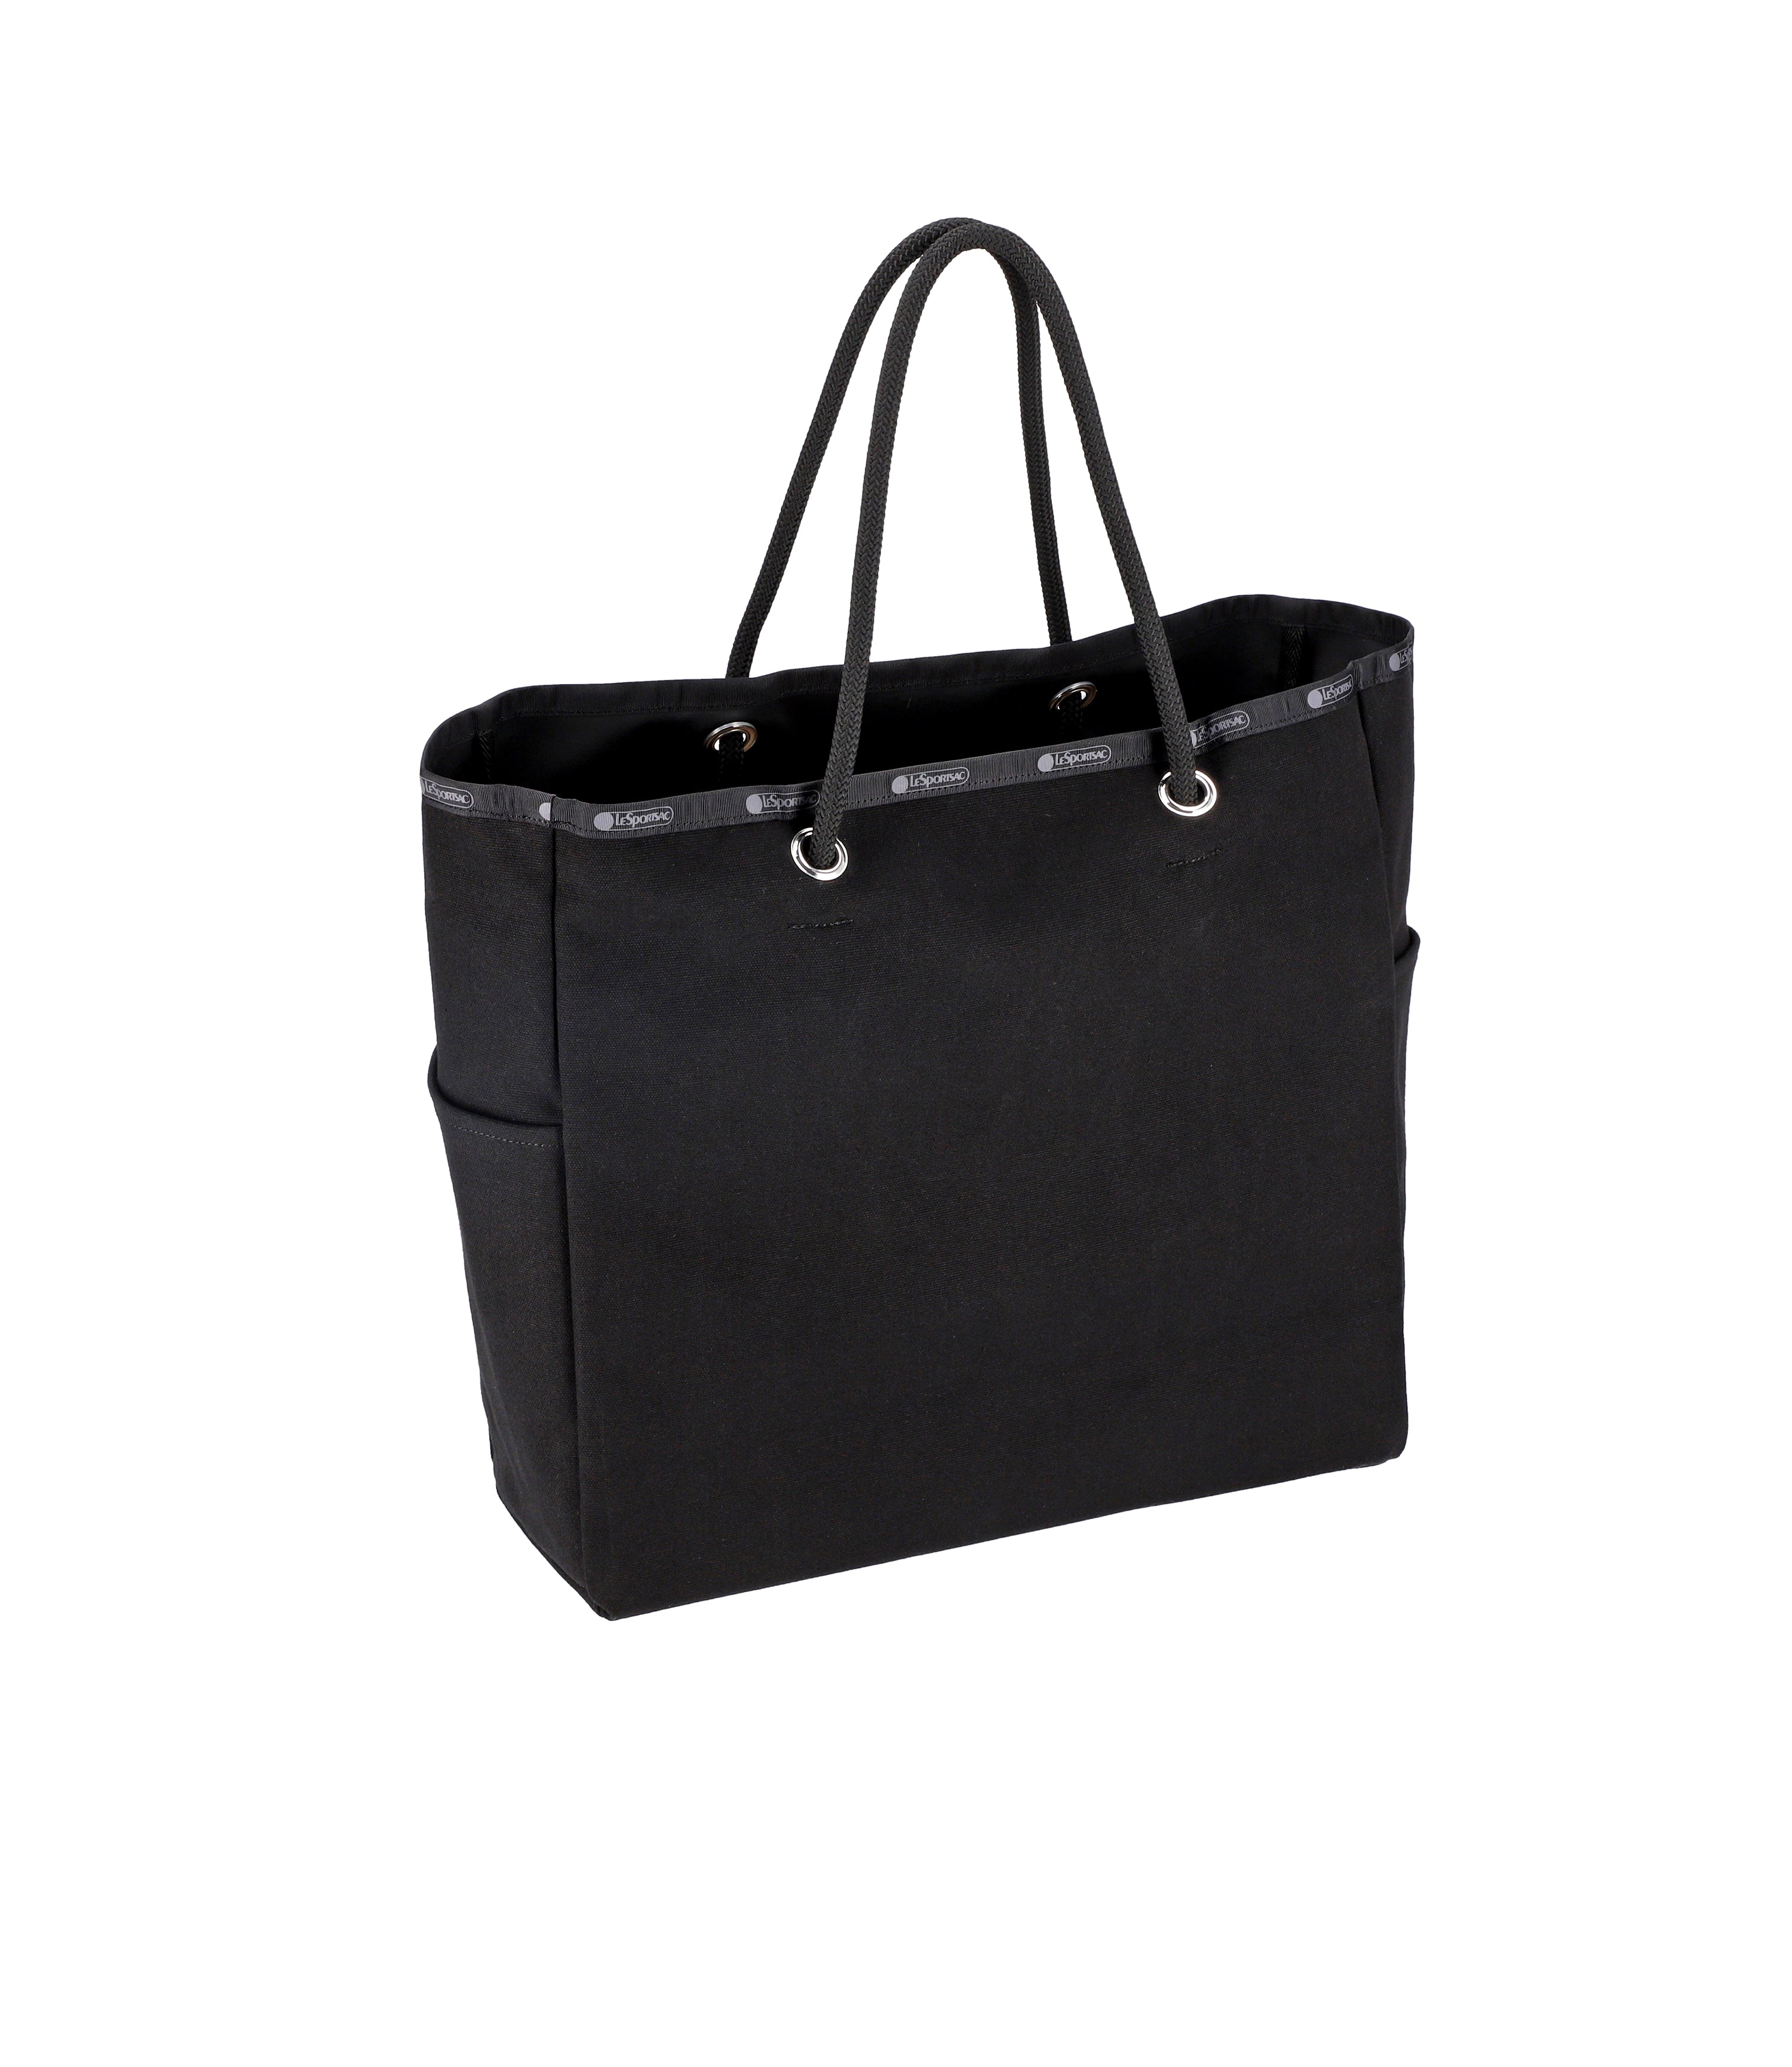 Lightweight Travel Tote Bags | Durable and Sporty Totes by 